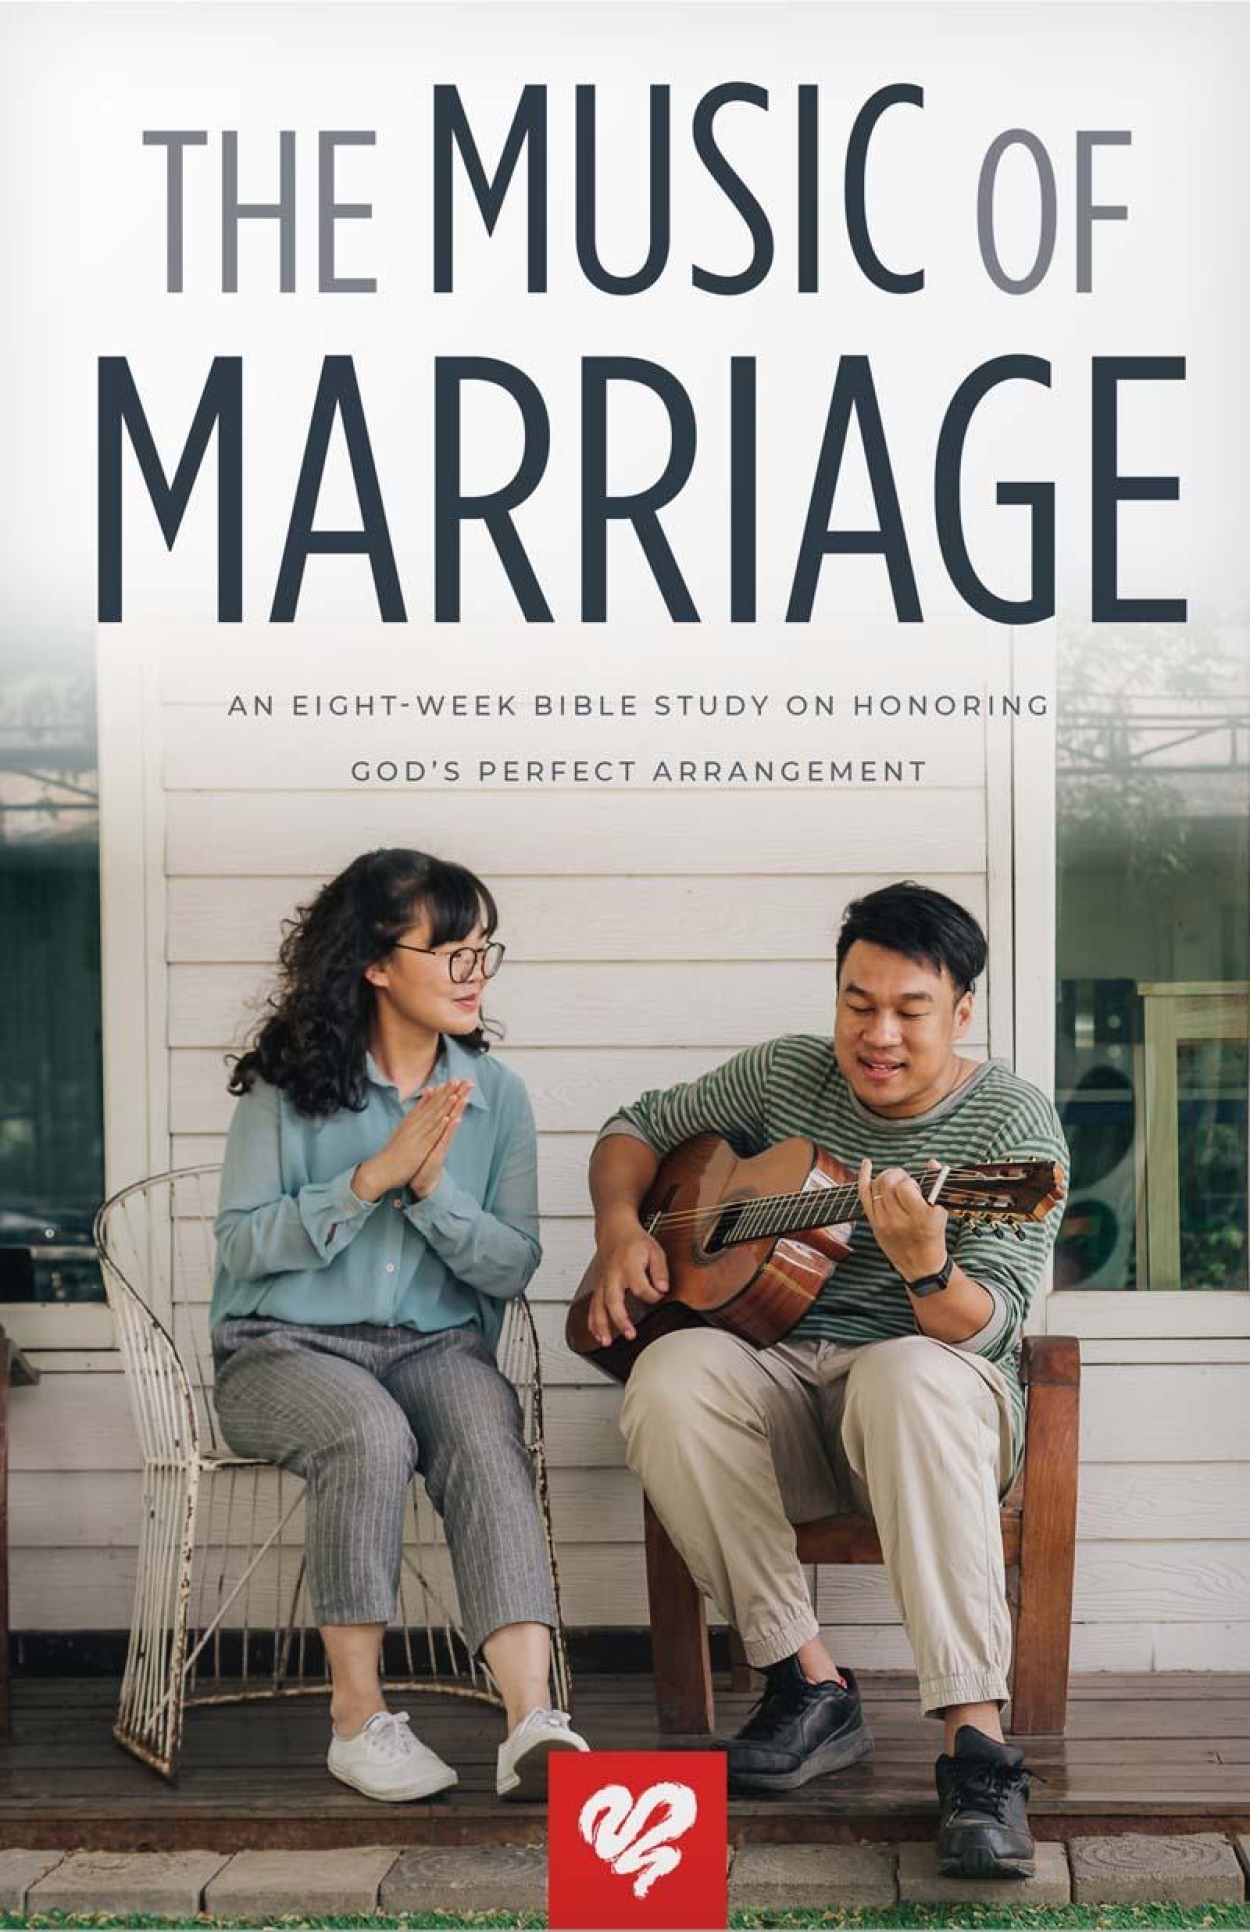 The music of marriage book b136 store detail front